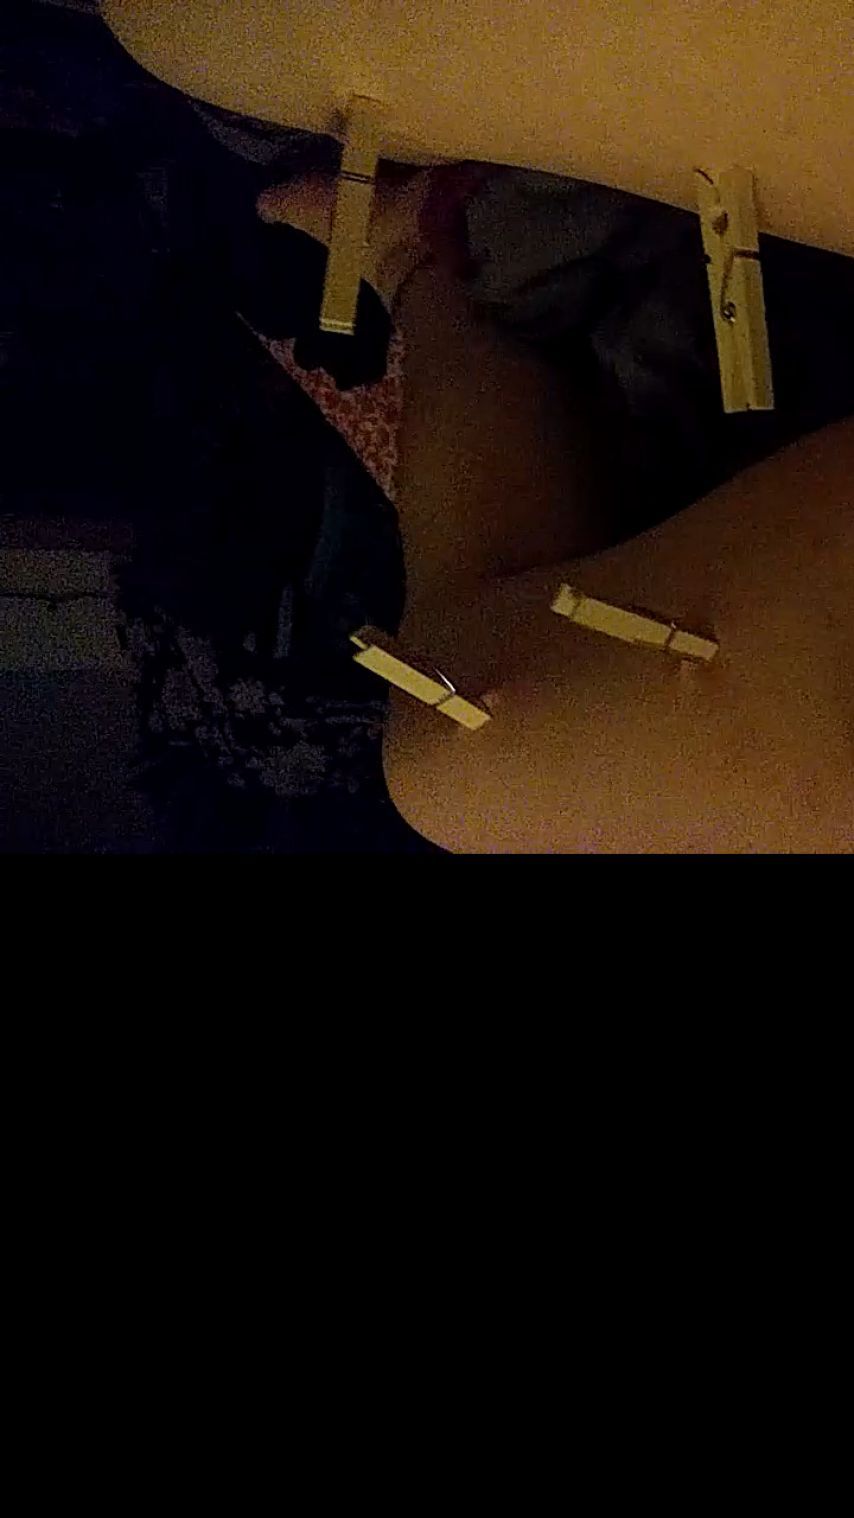 First Time Playing With Clothes Pins